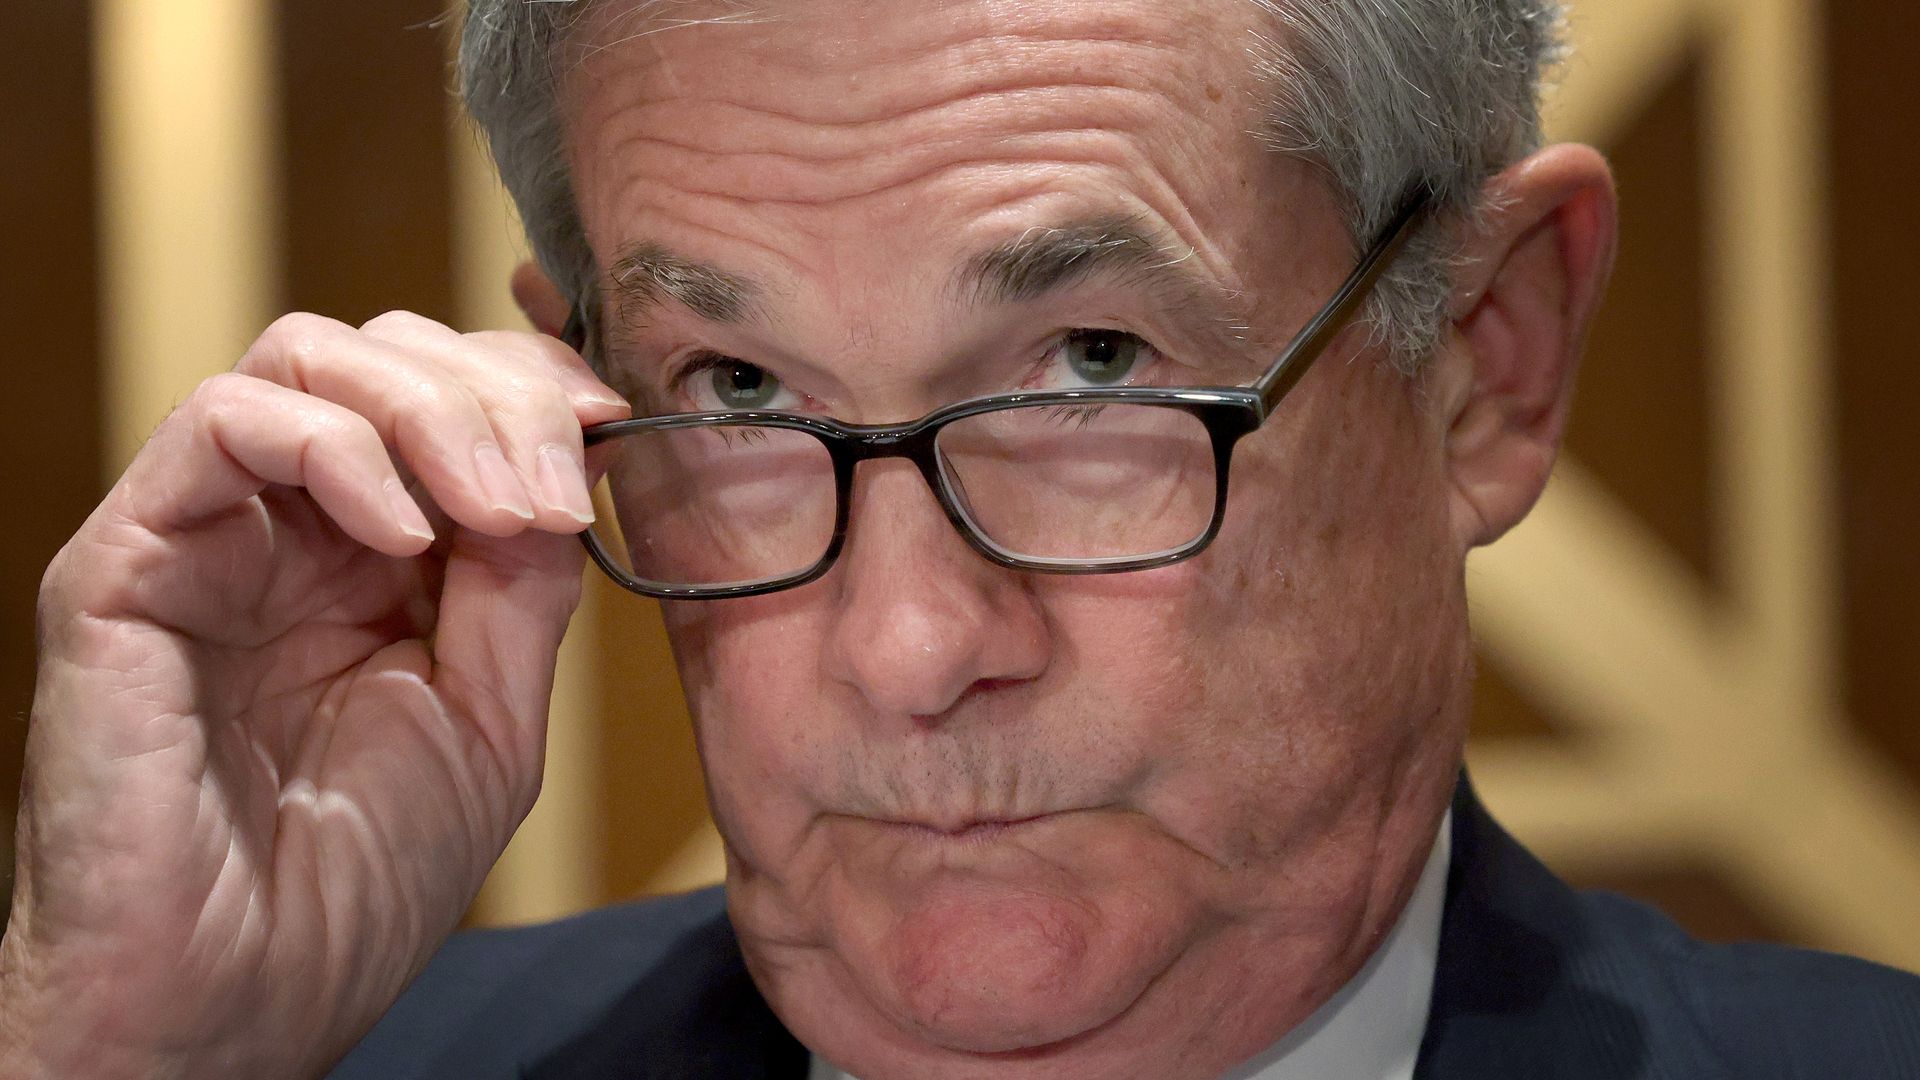 Federal Reserve Board Chair Jerome Powell adjusts his eyeglasses